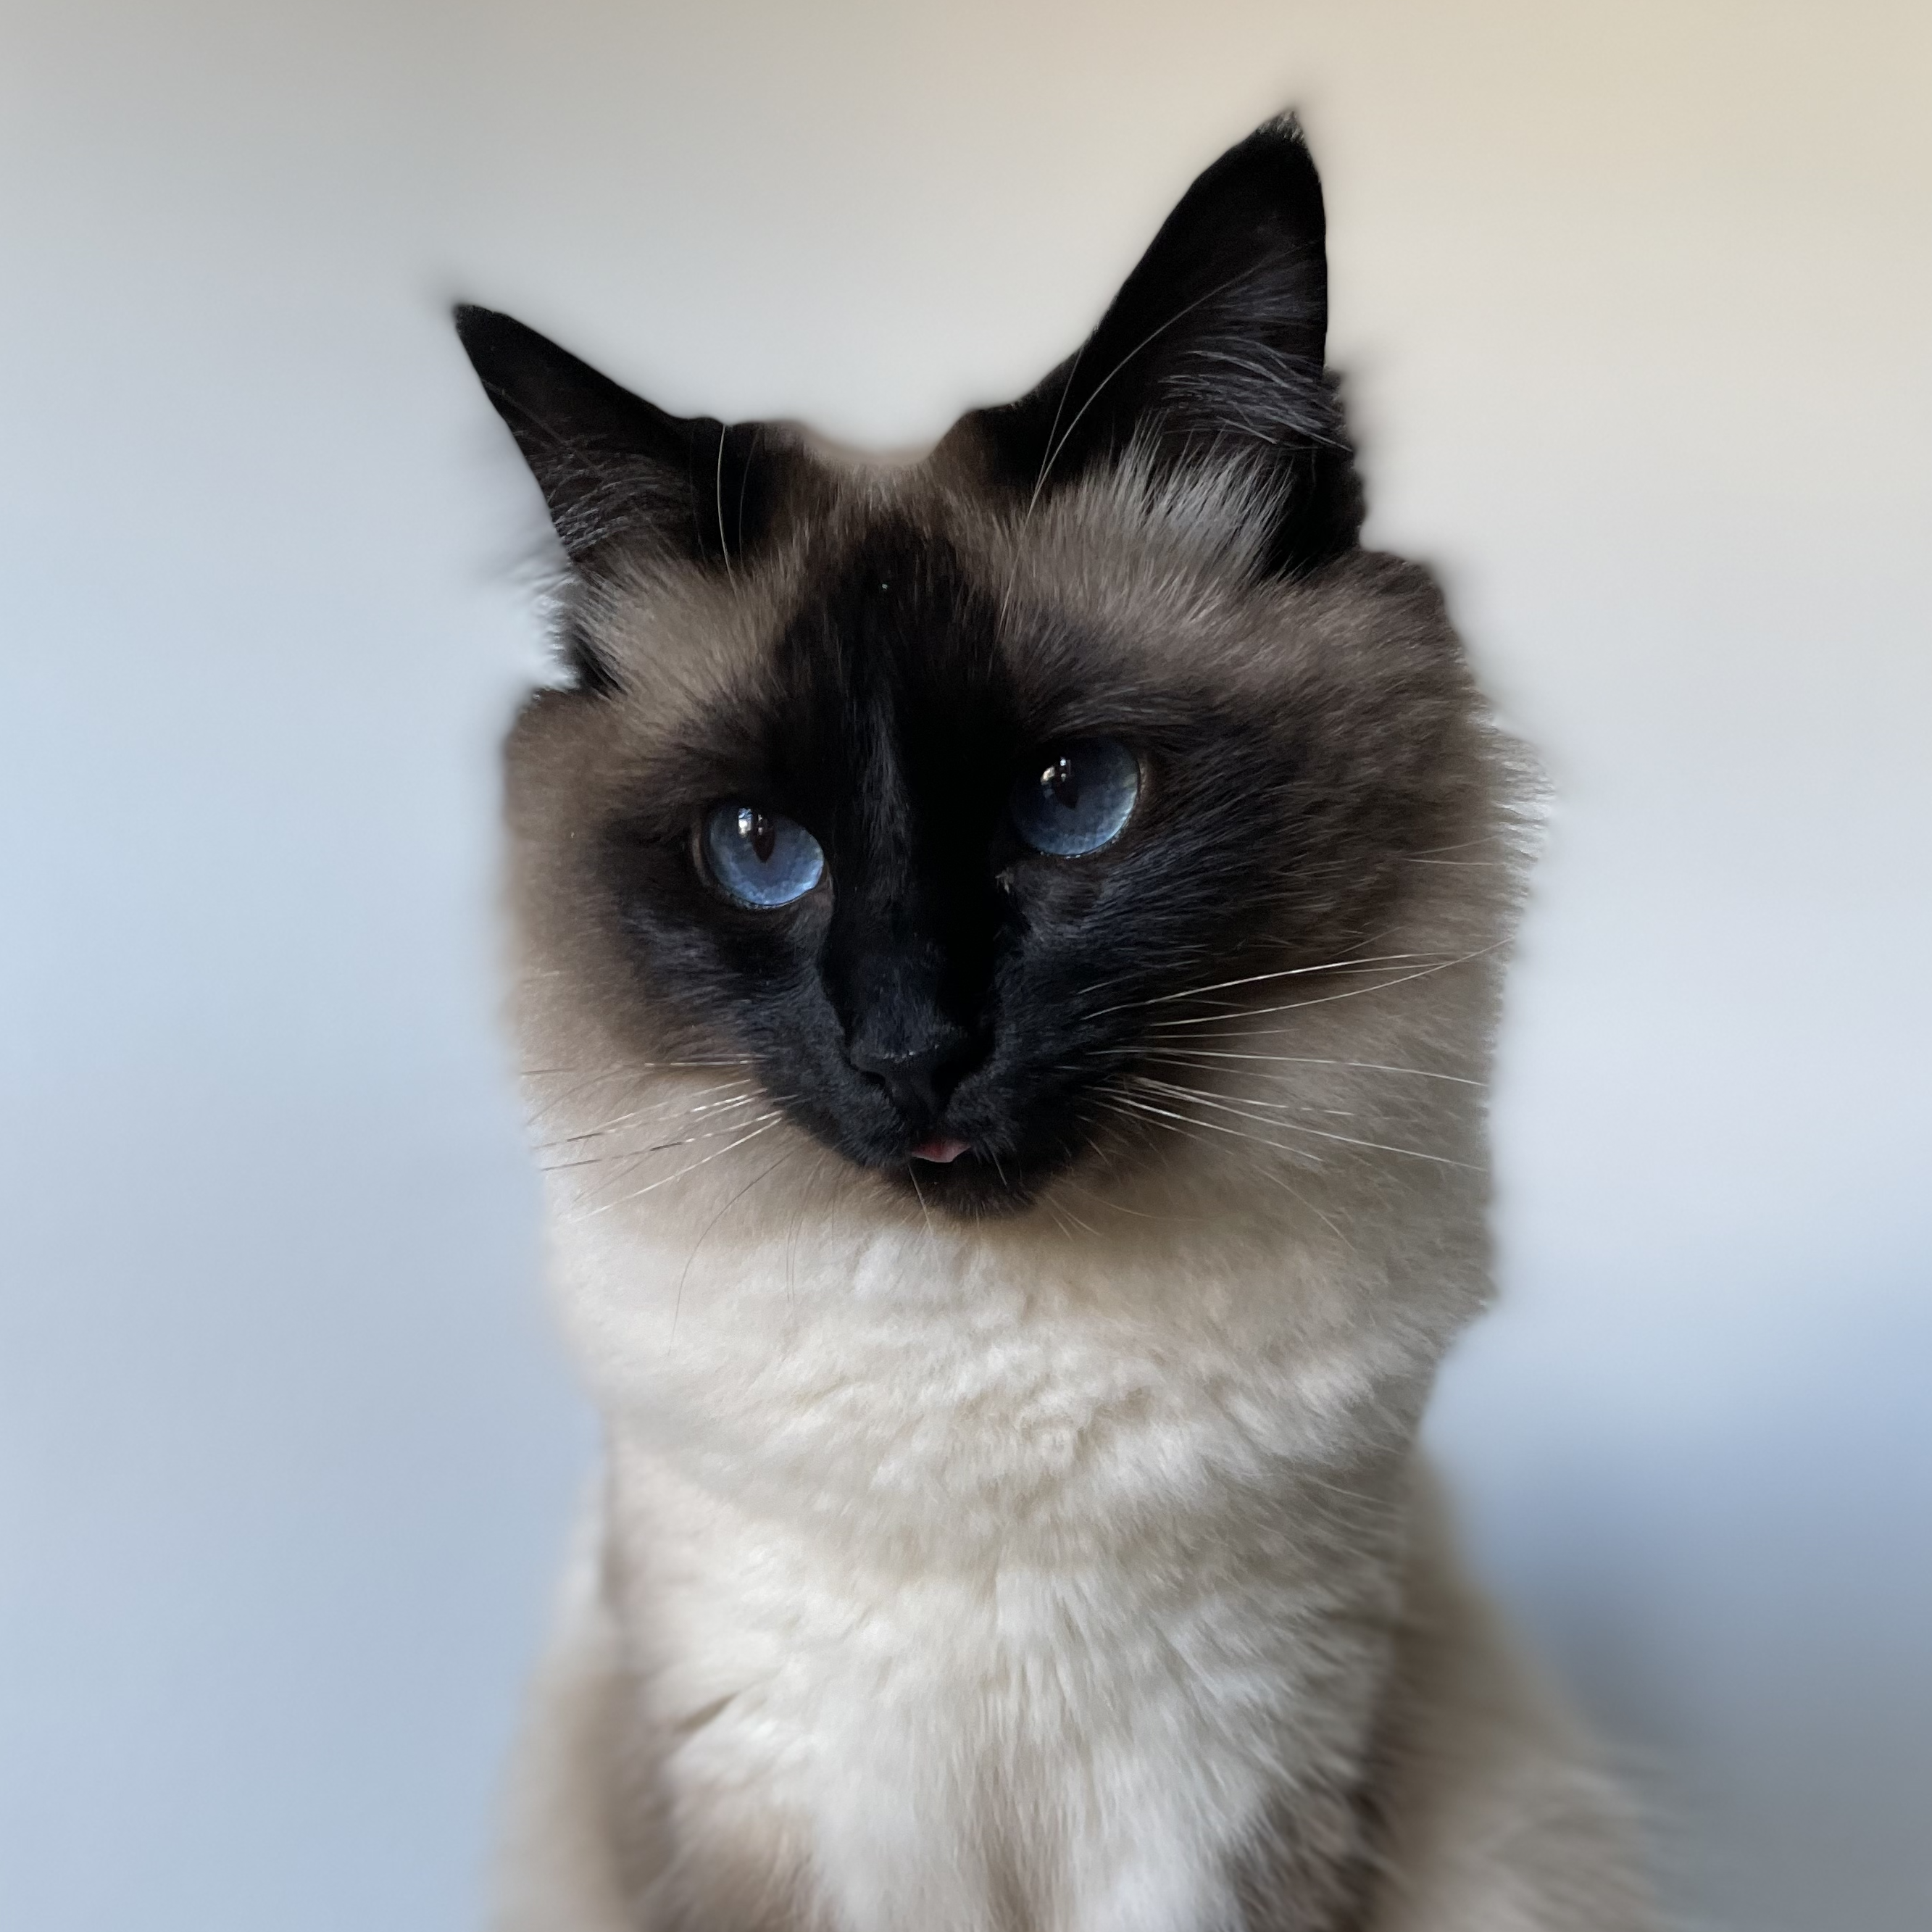 A photo of a Balinese cat, staring directly at the camera